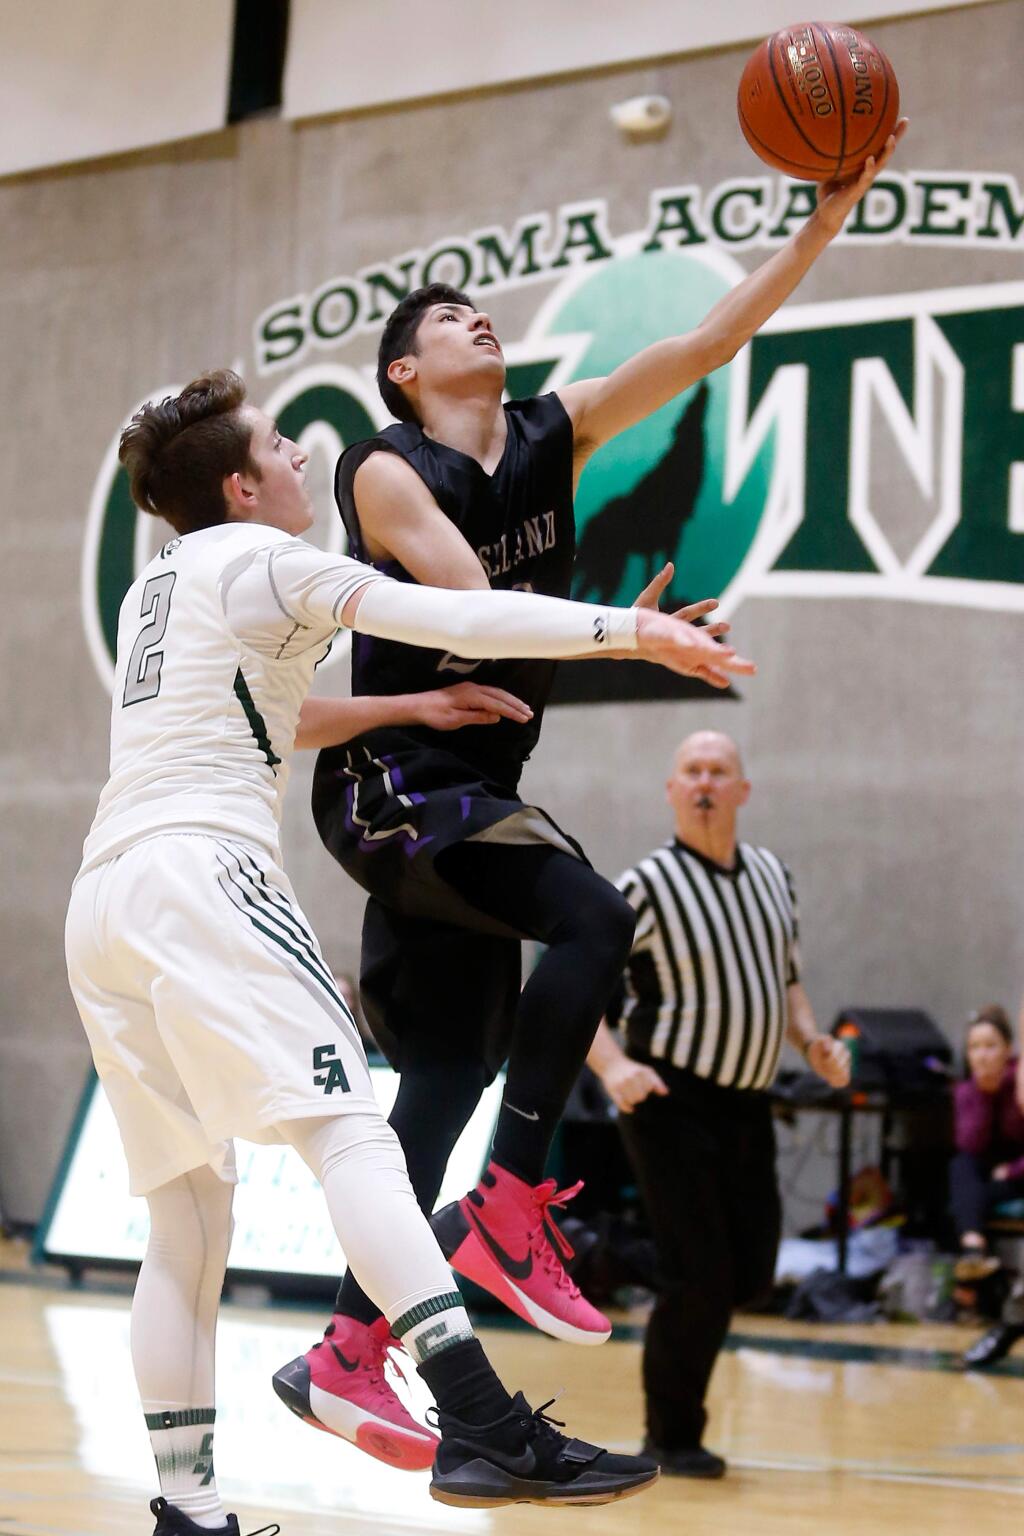 Roseland University Prep's Gilbert Jimenez (22), right, makes a layup while Sonoma Academy's Marco Della Santina (2) defends, during the first half of a boys varsity basketball game between Roseland University Prep and Sonoma Academy in Santa Rosa, California, on Tuesday, January 23, 2018. (Alvin Jornada / The Press Democrat)